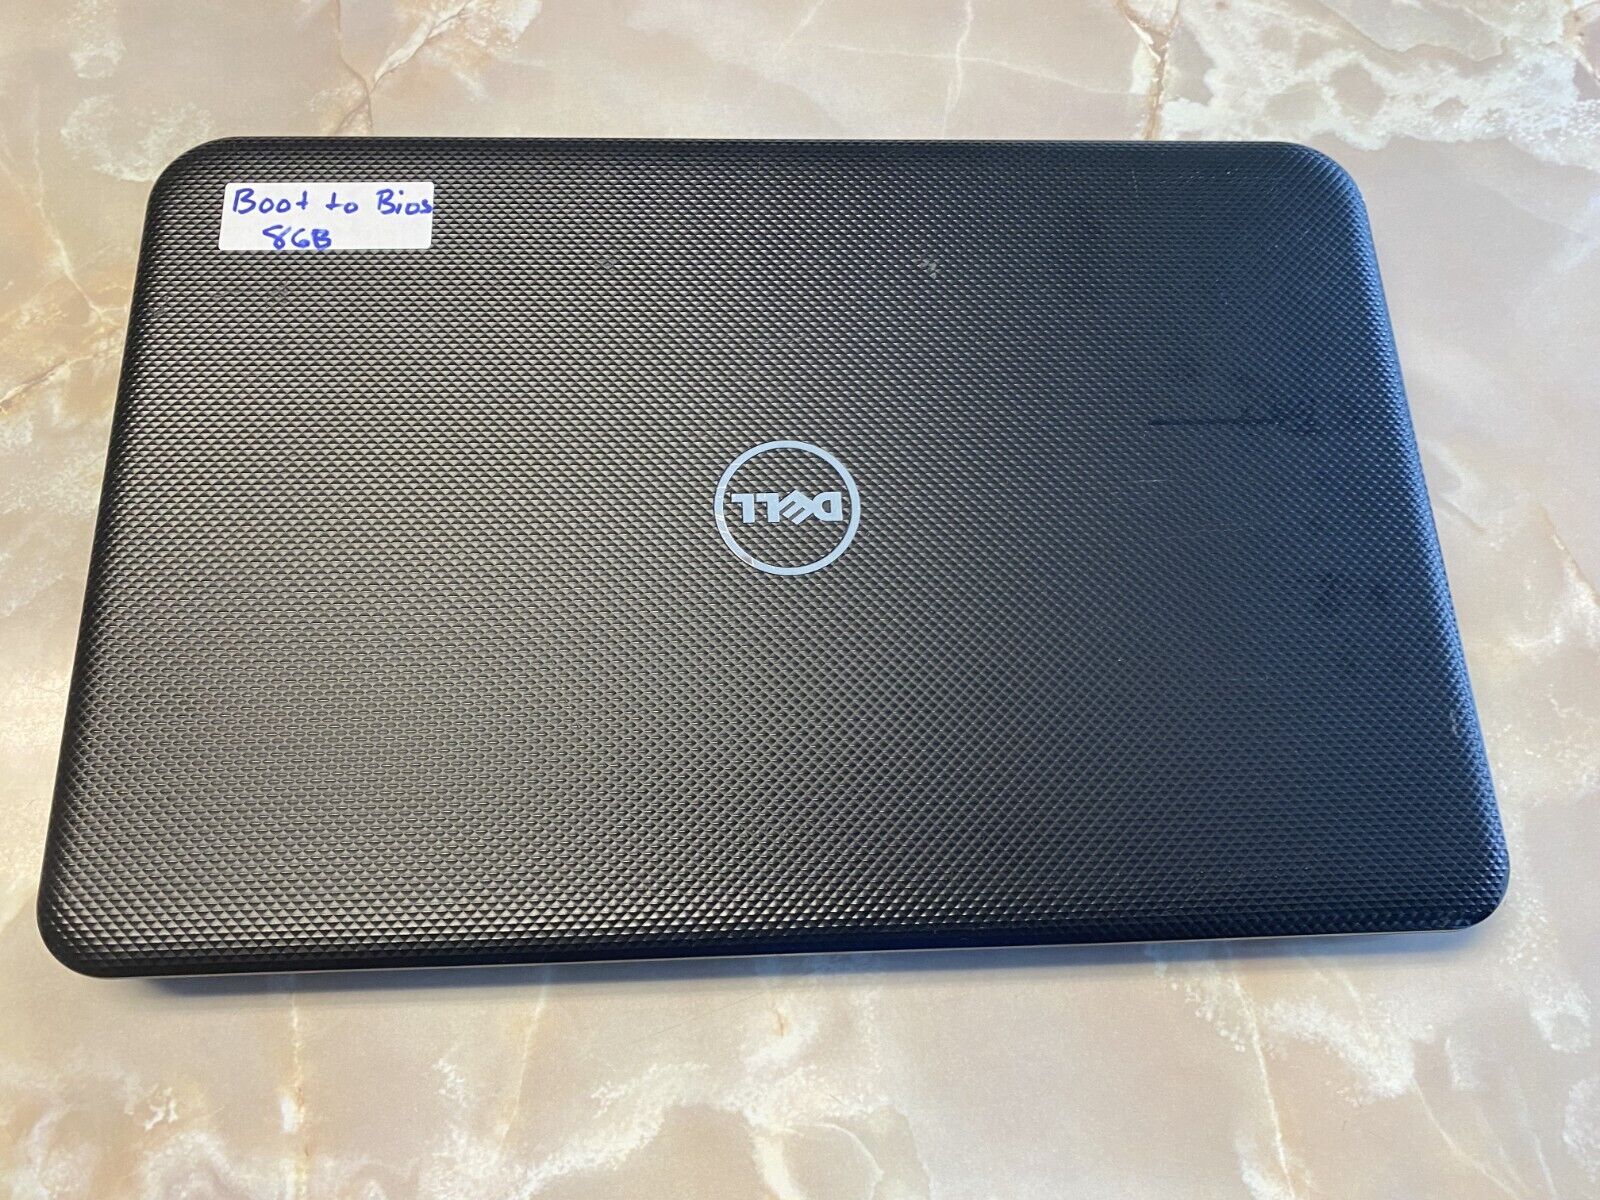 Dell Inspiron 17-3721 i3-3rd Gen 8GB Boots to Bios